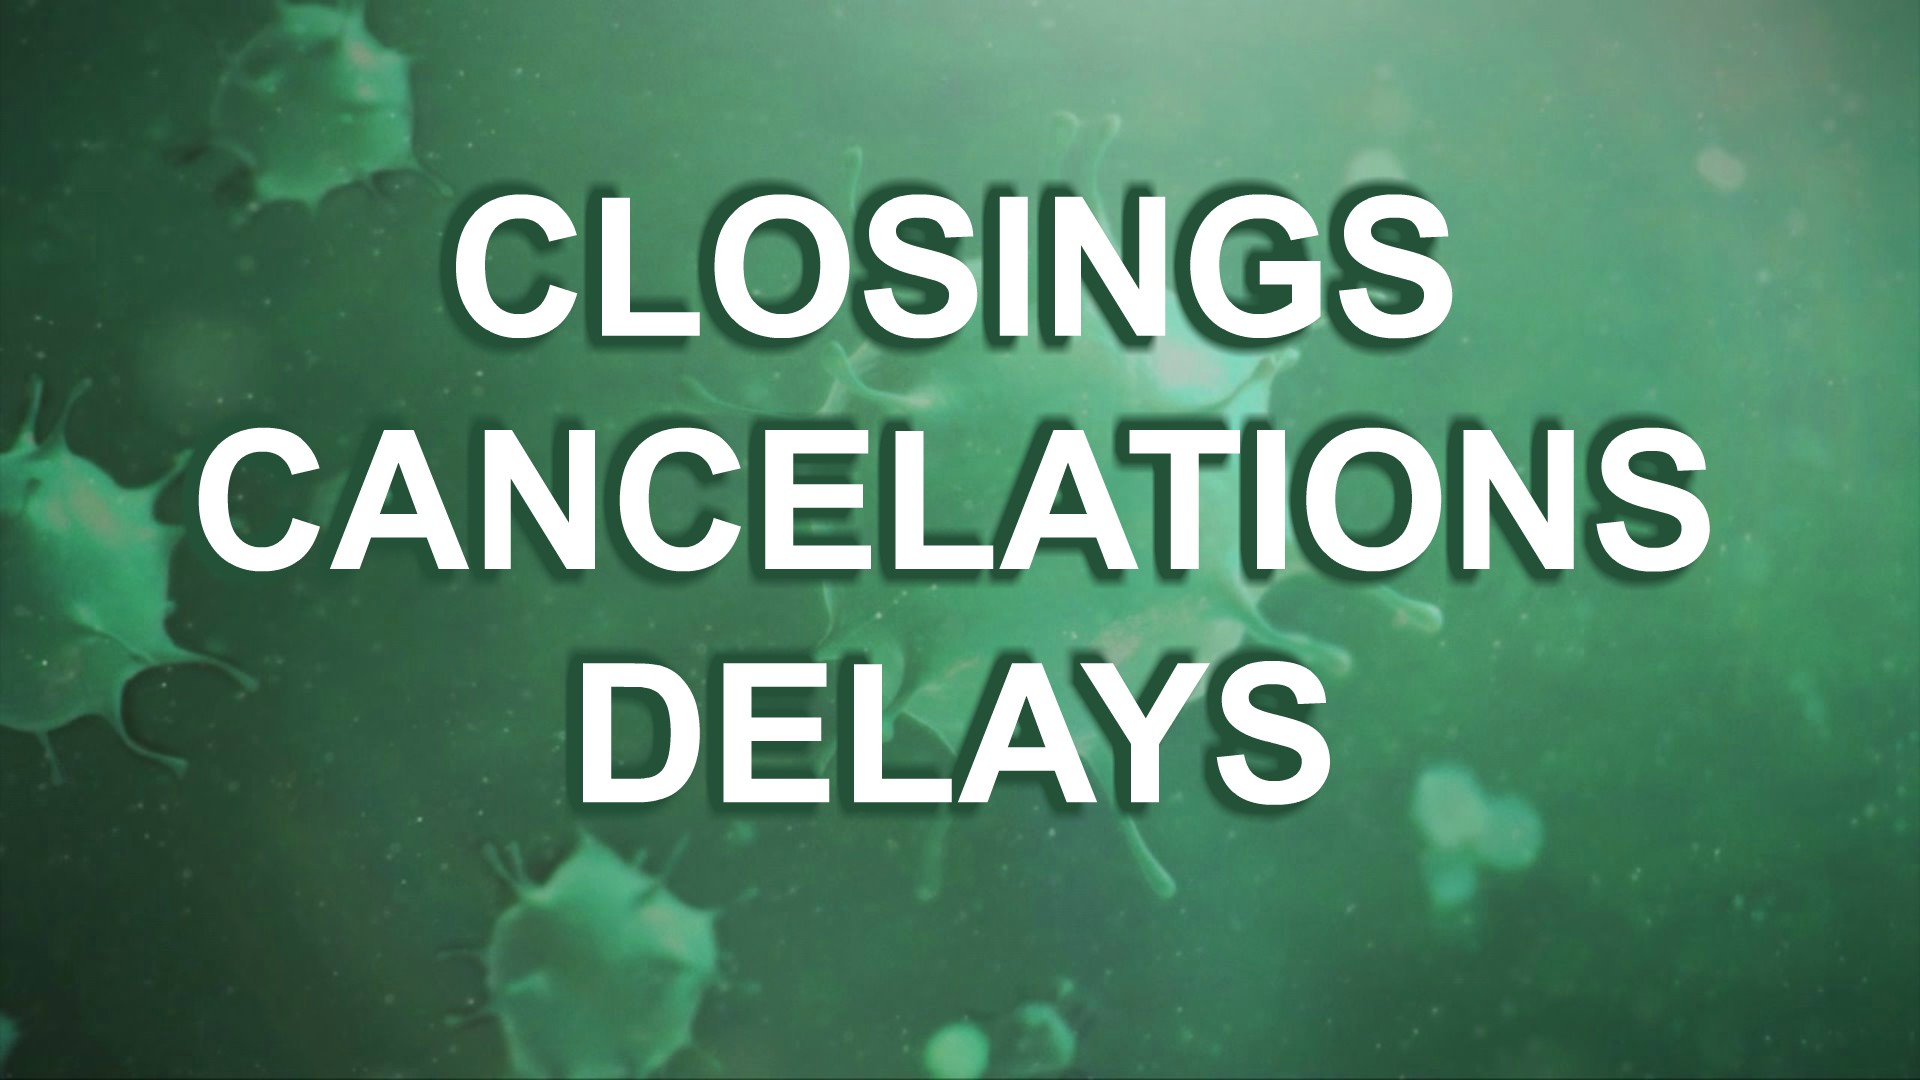 The latest information we have on closings and delays related to the COVID-19 outbreak. Check back for updates.